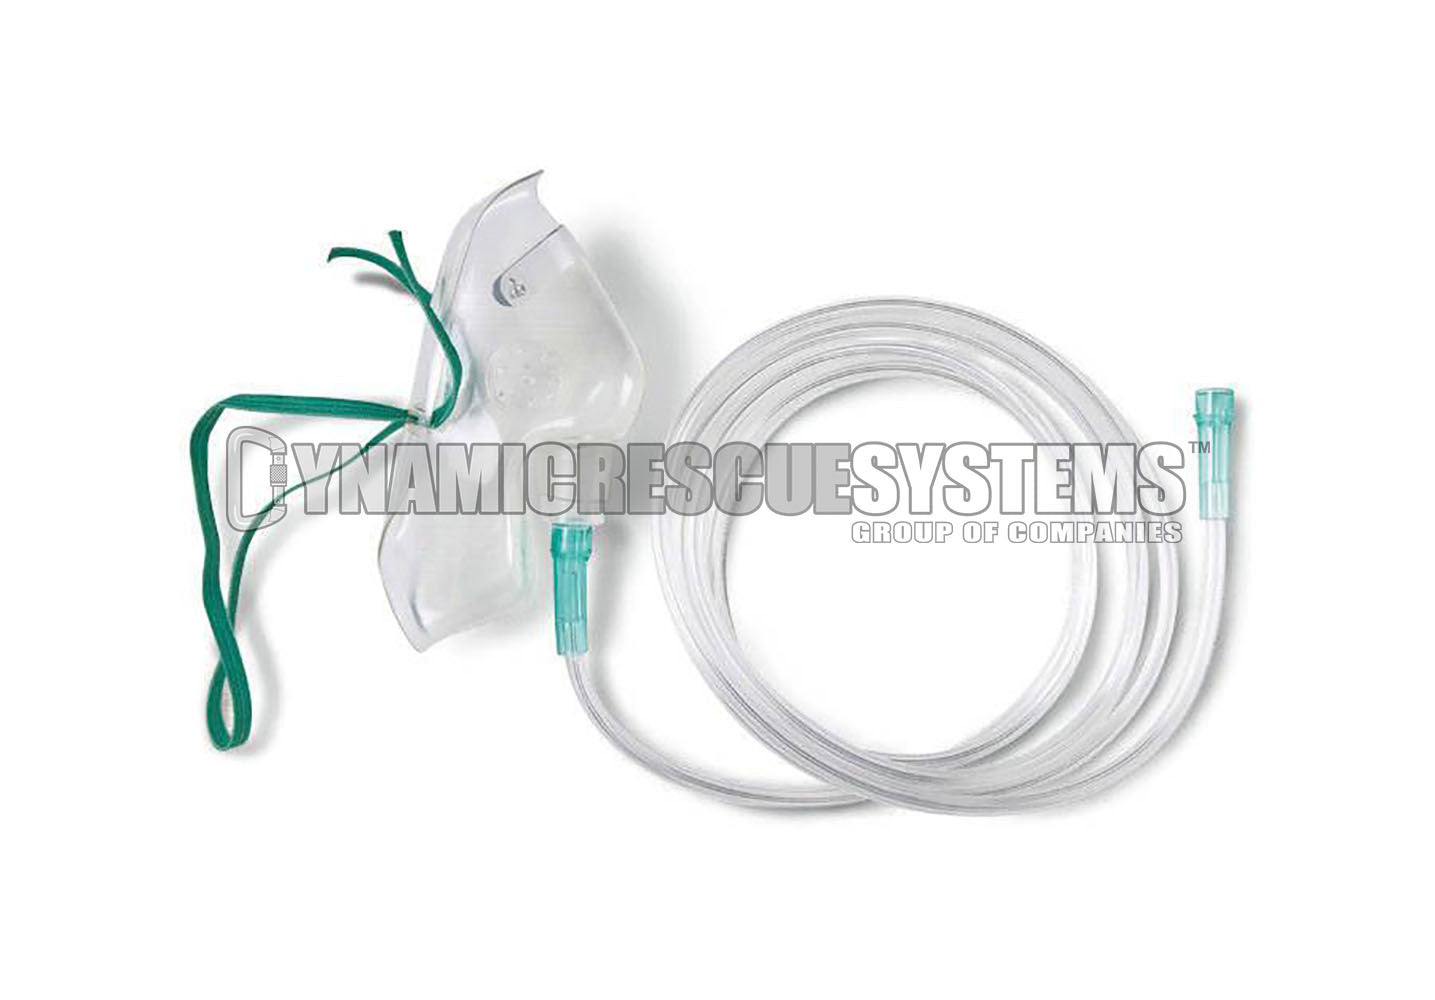 Standard Oxygen Mask with tubing - Dynamic Rescue Equipment - Dynamic Rescue